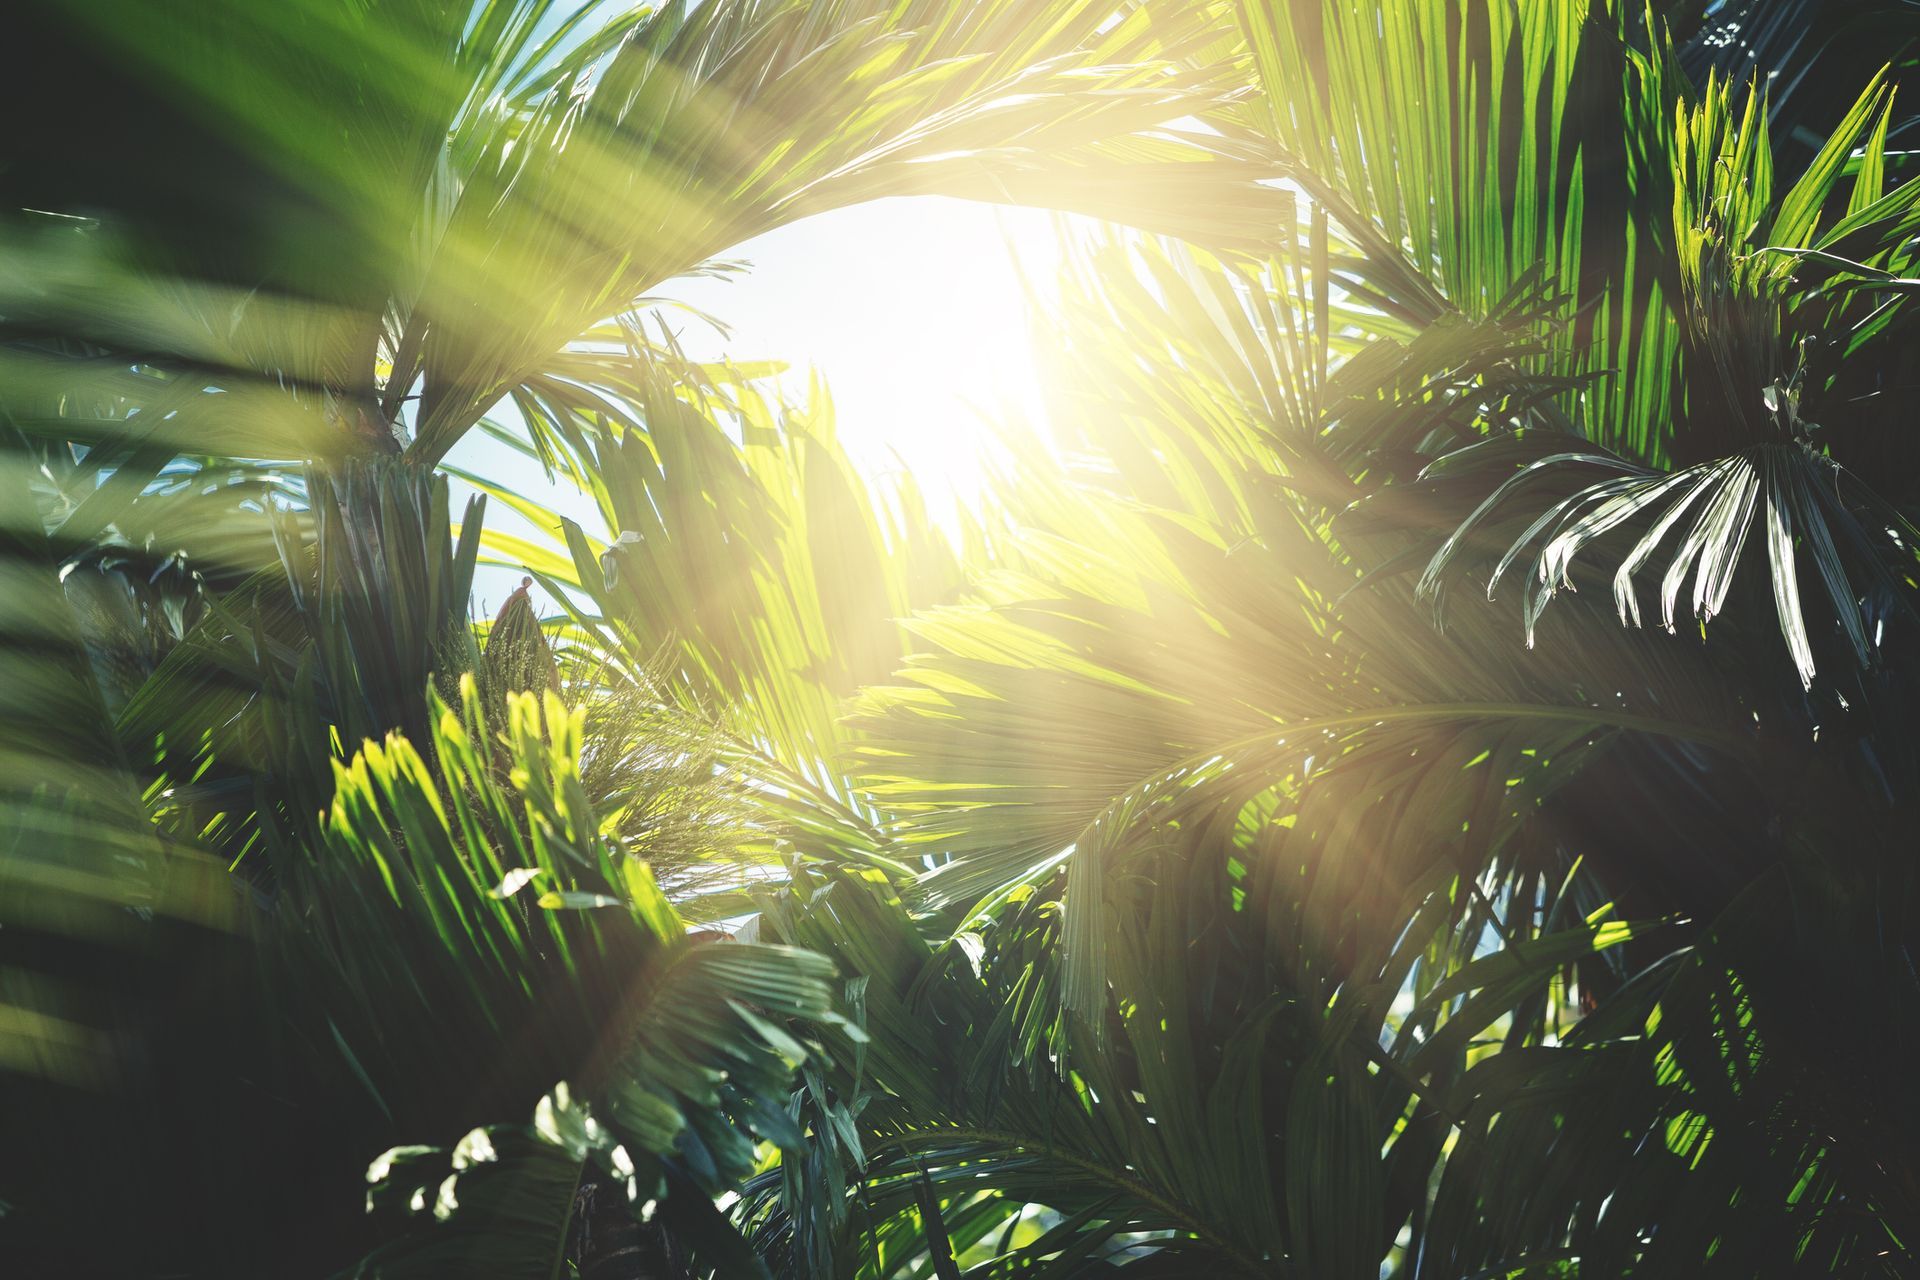 The sun is shining through the leaves of a palm tree.